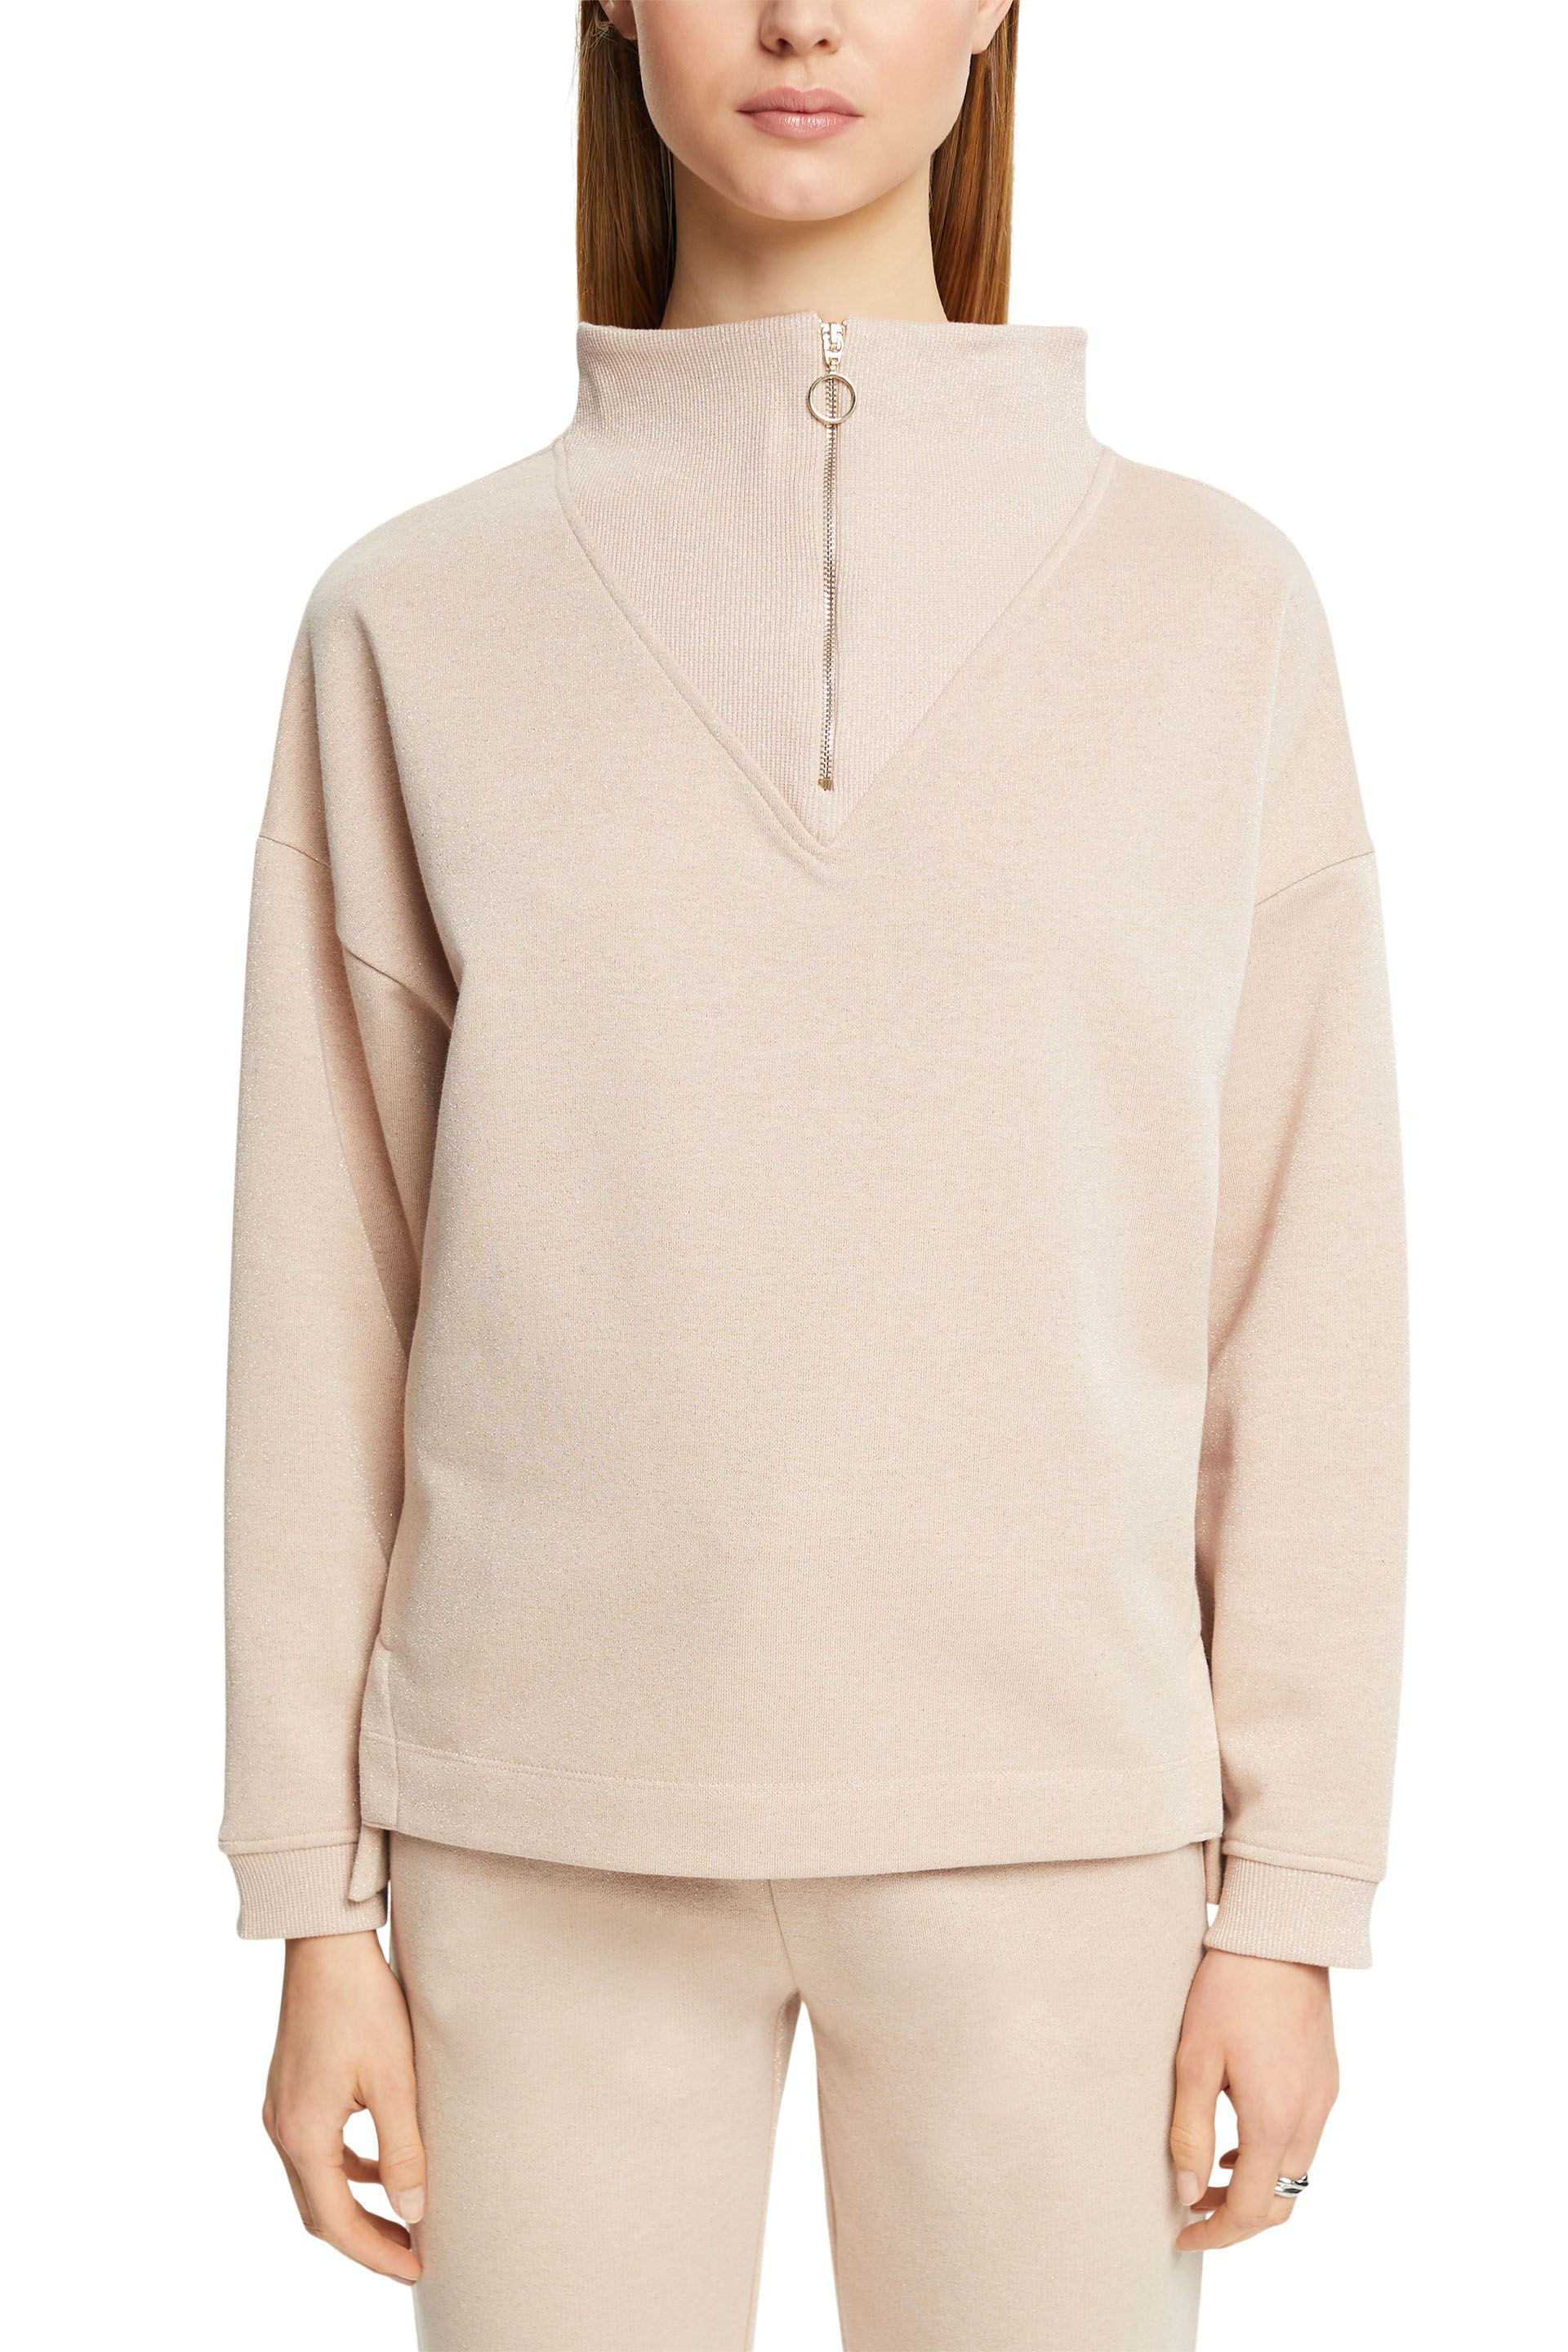 Esprit - Oversized sweatshirt with glitter effect in cotton blend, Natural, large image number 1